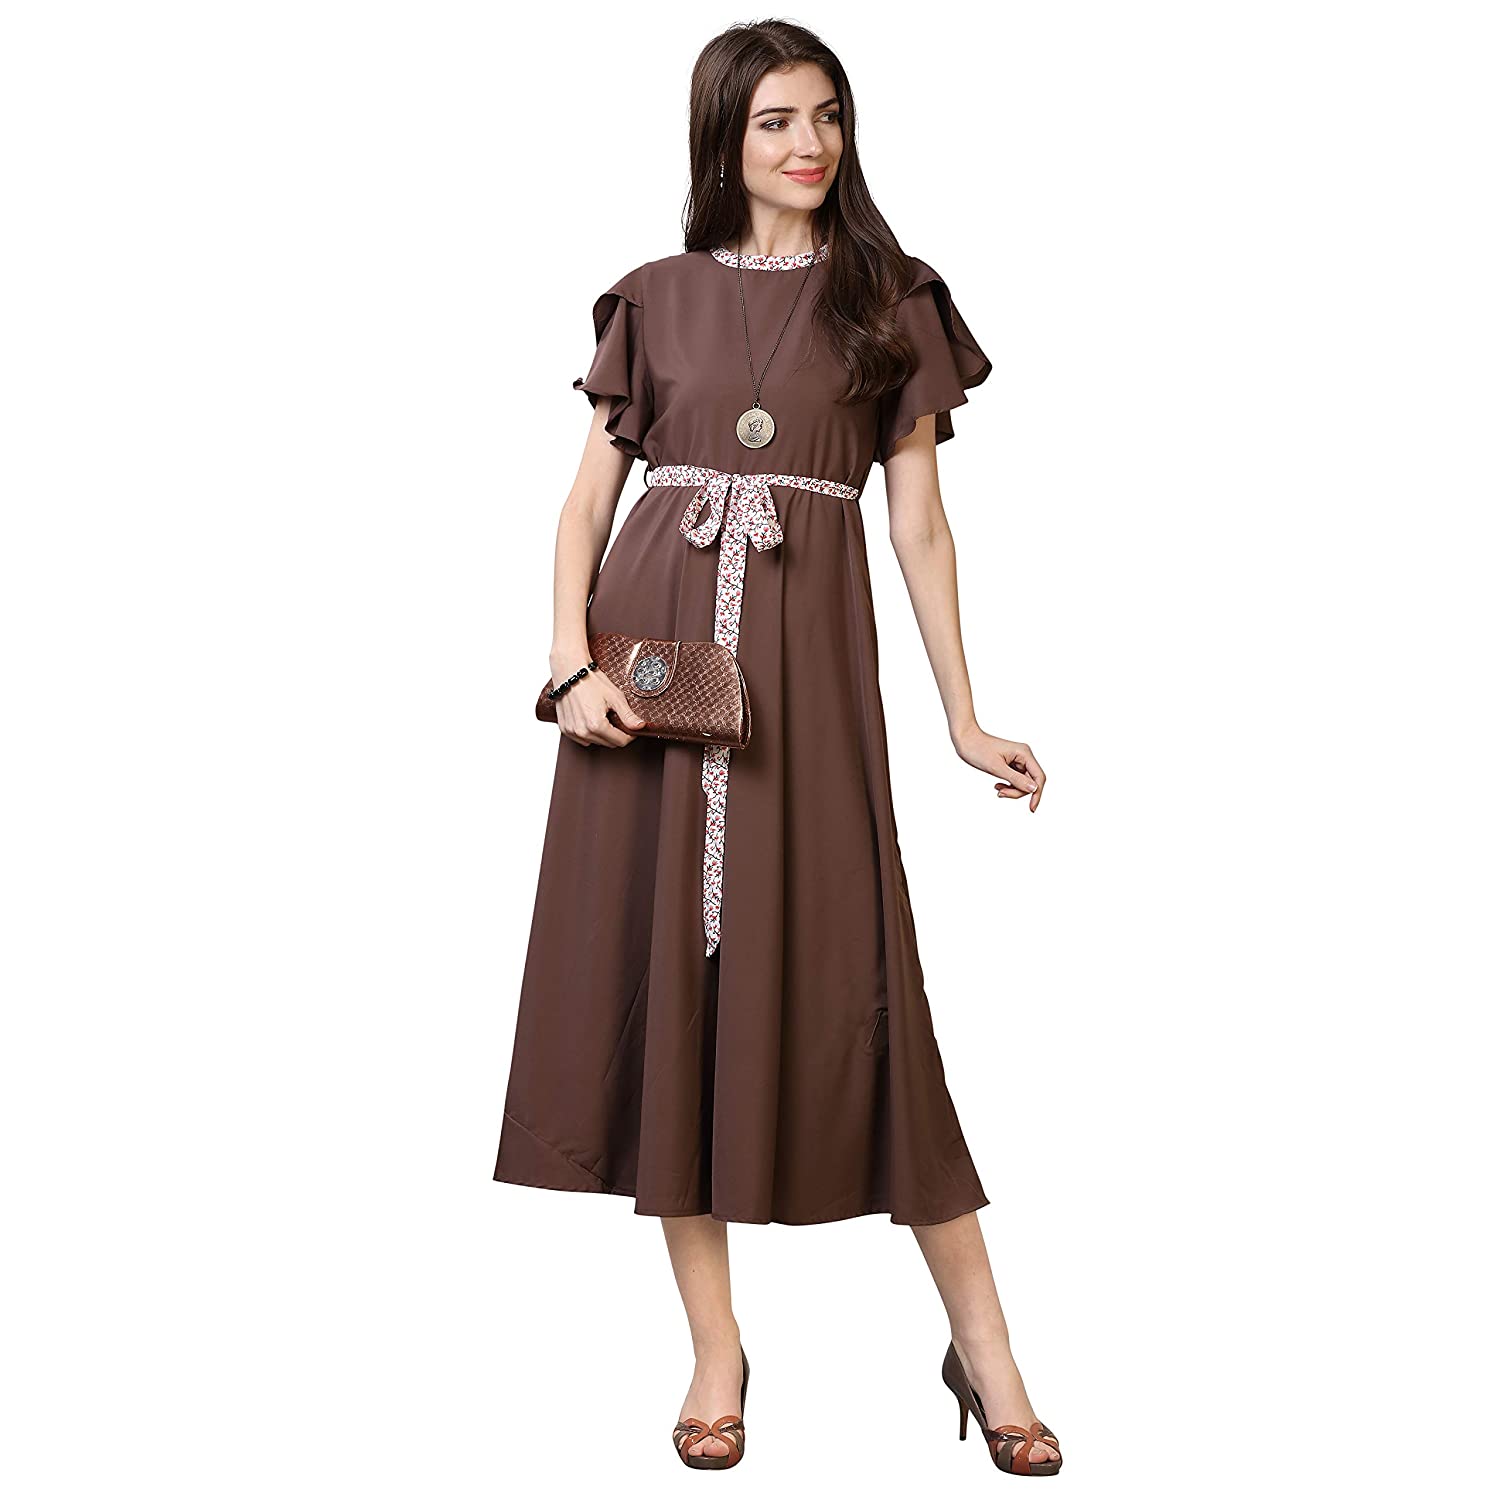 OOMPH! Women's Crepe A-Line Maxi Dress -  DRESSES in Sri Lanka from Arcade Online Shopping - Just Rs. 4699!